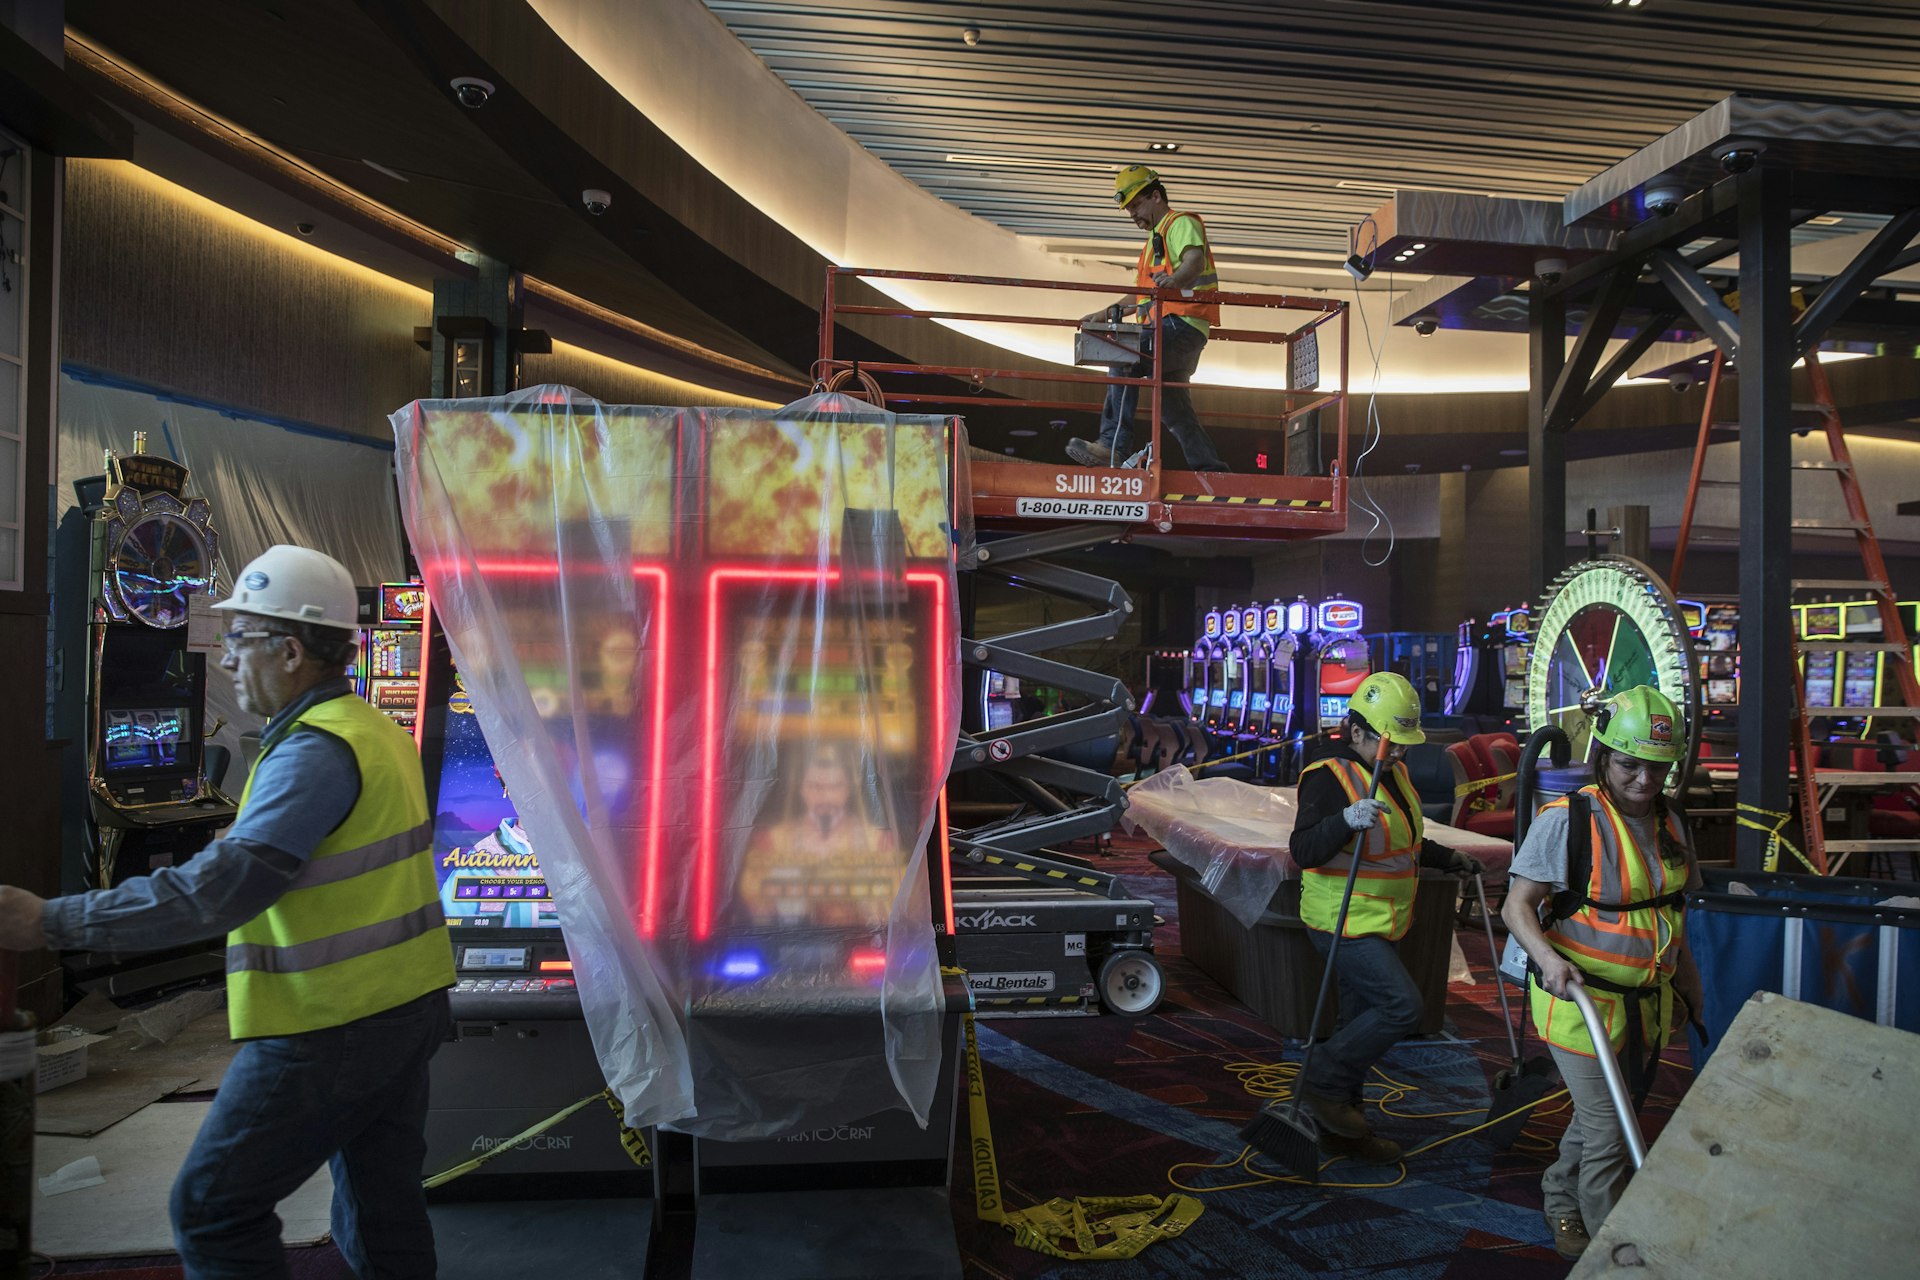 Construction workers in bright yellow safety vests and white hard hats work amidst brand new casino slot machines, roulette wheels, and other electronic games still wrapped in plastic. One holds a broom, one is vacuuming, and another stands on a scissor lift. A fourth on the left frame is gesturing to something just out of sight.